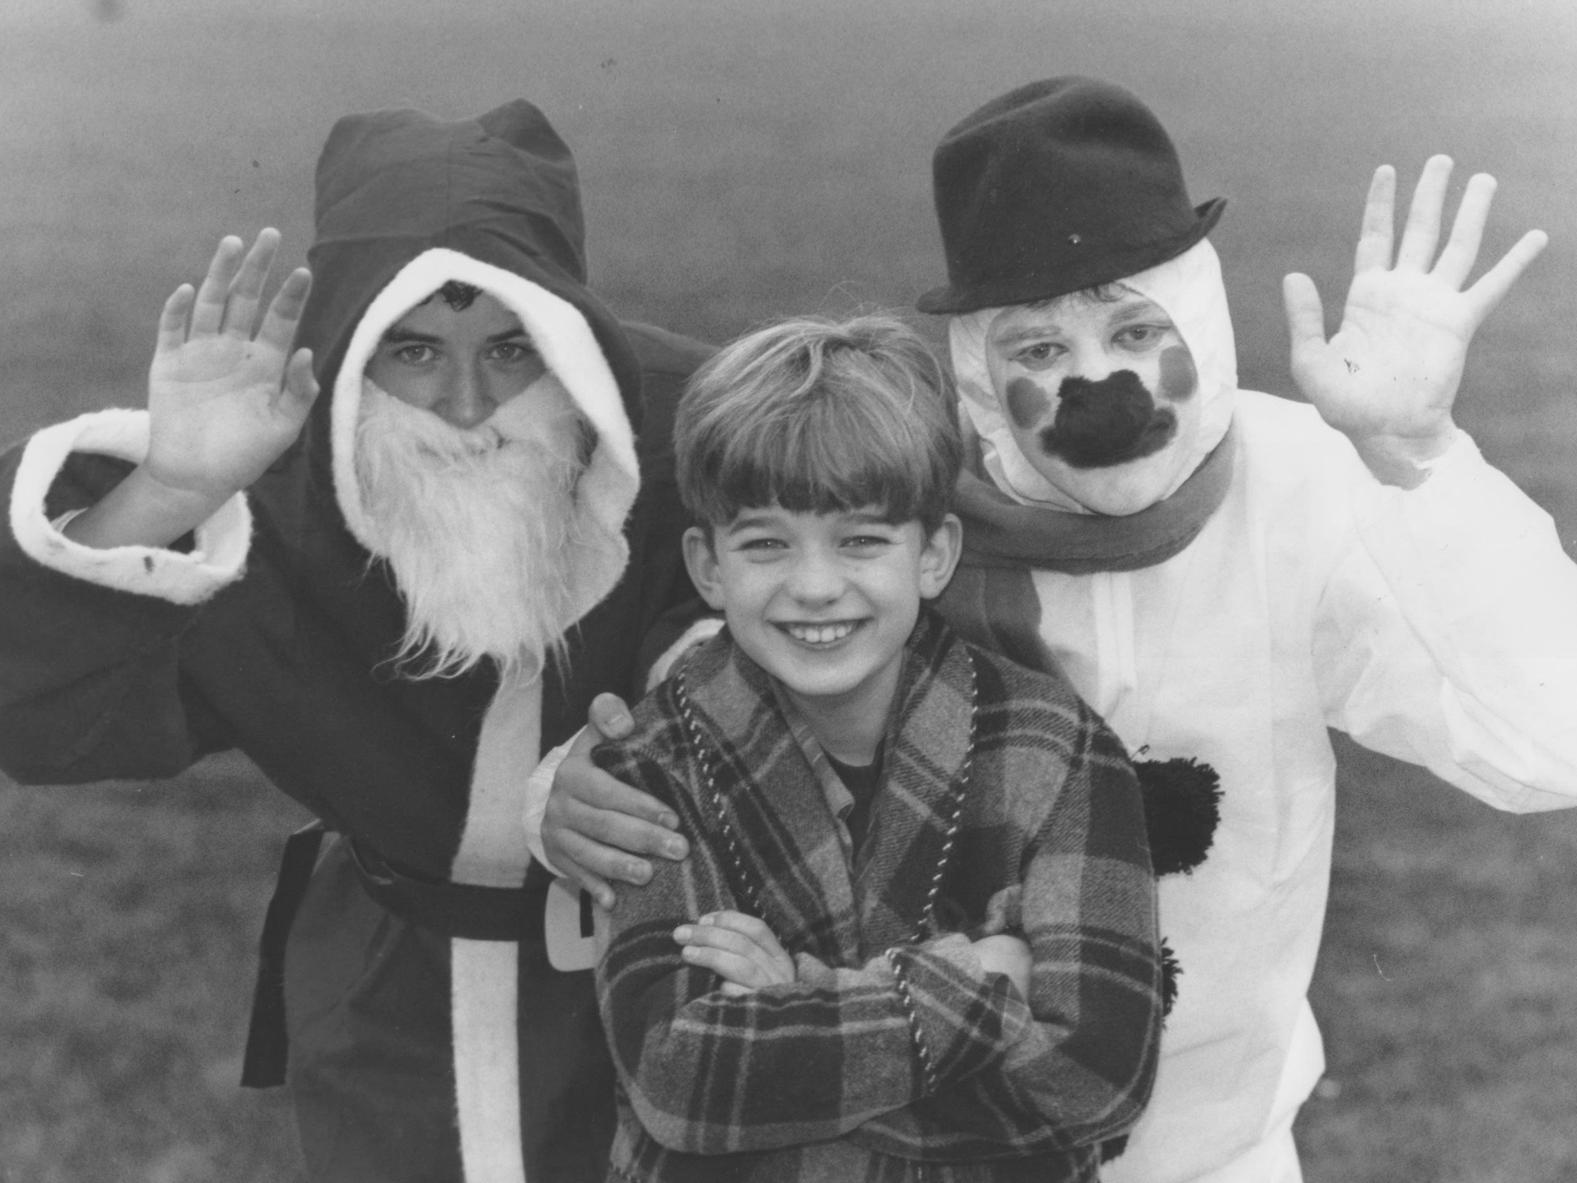 Preparing for their Christmas production of Snowman in December 1997 at Graham School are, left to right, Dale Williamson, Adam Dardouk, and Chris Garrow.